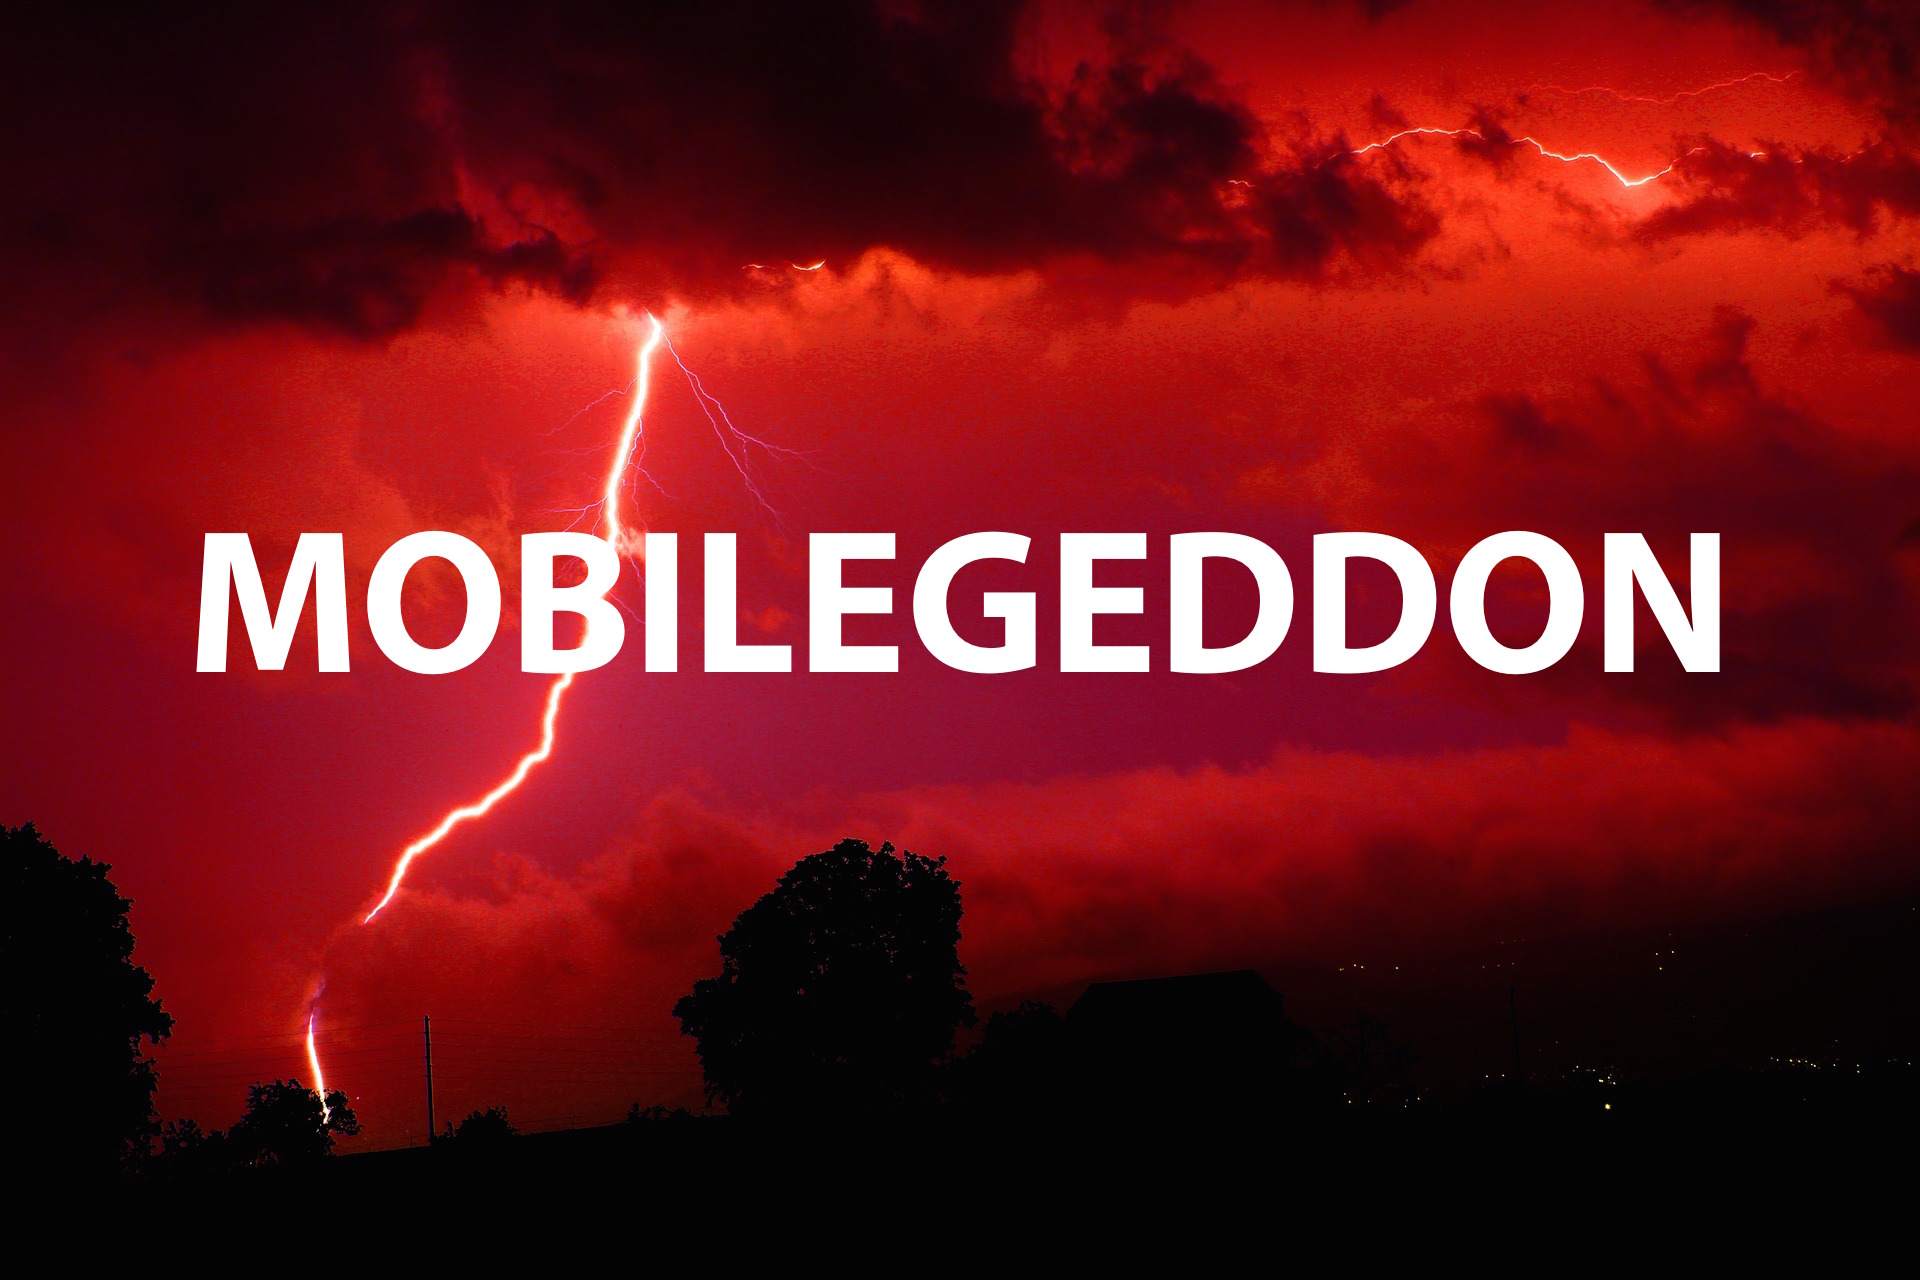 Flash: The impacts of Mobilegeddon